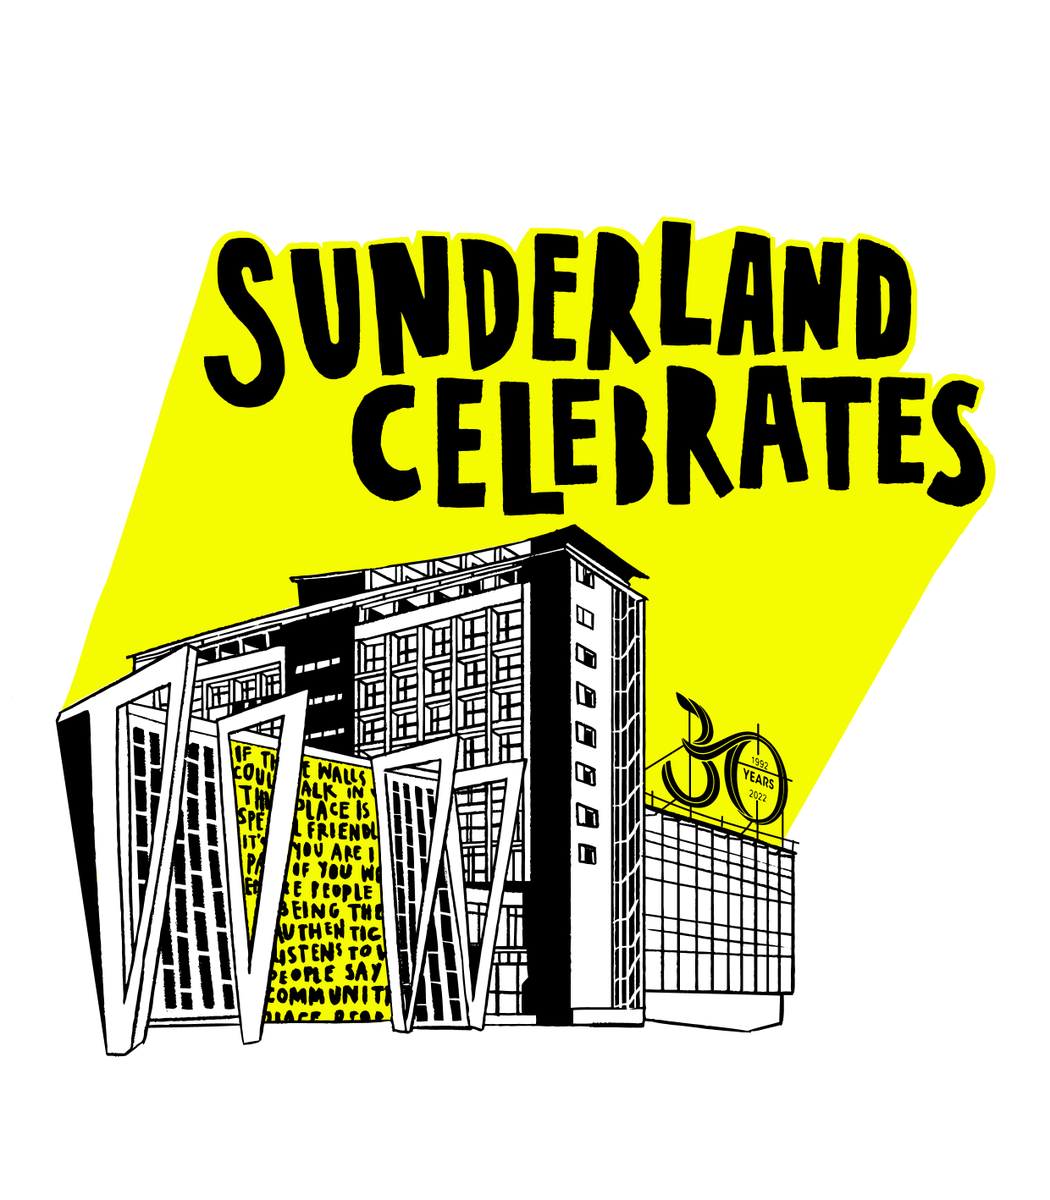 We have FREE family drop in sessions running every weekend until 11 December to celebrate our Sunderland Celebrates: Celebrating 30 Years of the University of Sunderland exhibition. Find out more: sunderlandculture.org.uk/our-venues/nat…